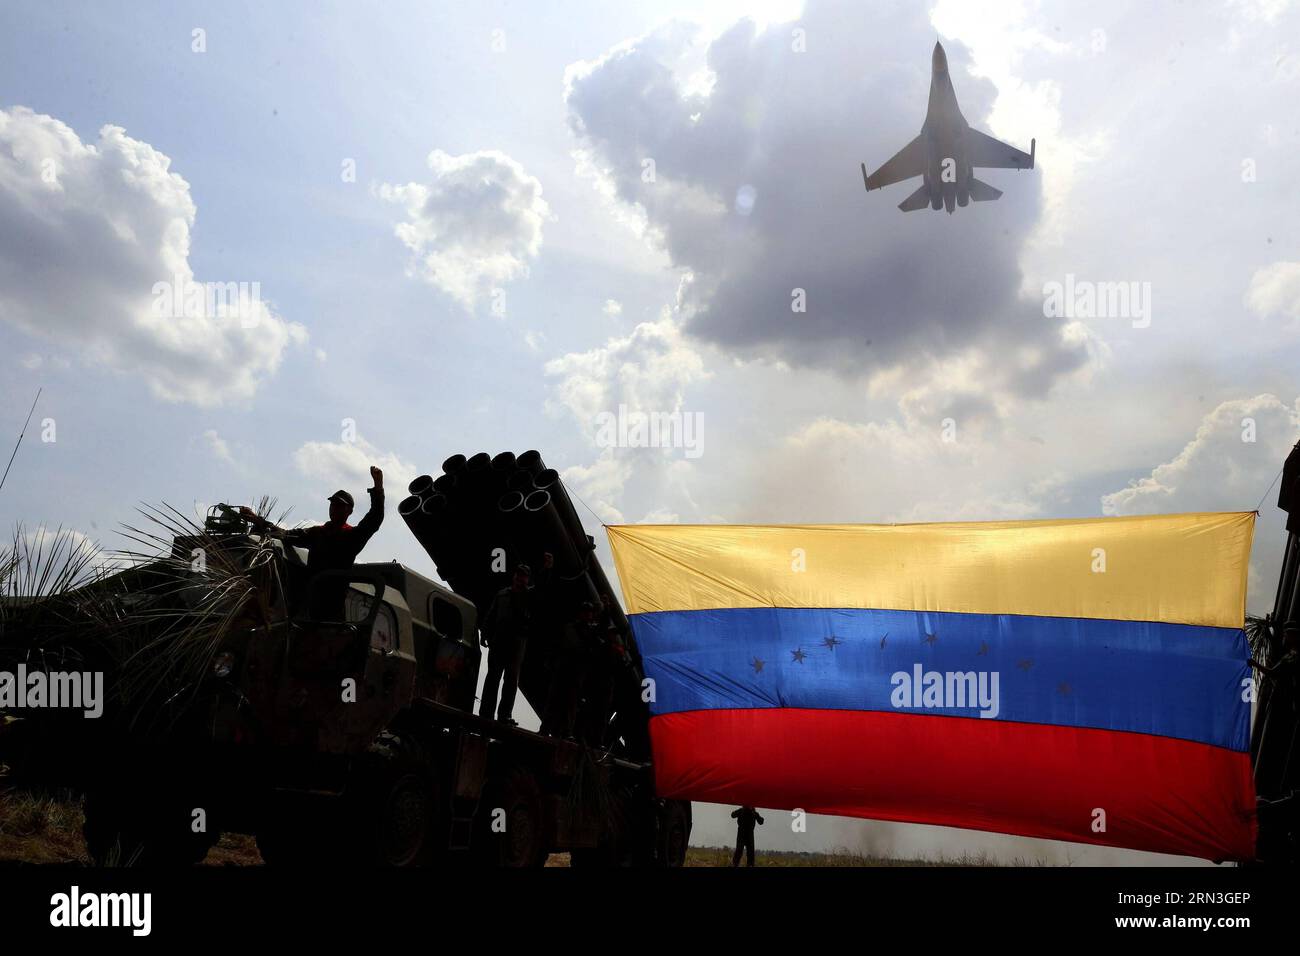 (150415) -- APURE, April 15, 2015 -- A member of the Bolivarian Armed National Force (FANB) takes part in the military exercise 2015 Sovereign Shield in San Carlos del Meta, Apure state, Venezuela, on April 15, 2015. The FANB held a military exercise of antiaircraft artillery drill 2015 Sovereign Shield with the participation of 480 military members, according to local press. Gregorio Teran/AVN) (azp) VENEZUELA-APURE-MILITARY-EXERCISE e AVN PUBLICATIONxNOTxINxCHN   April 15 2015 a member of The Bolivarian Armed National Force  Takes Part in The Military EXERCISE 2015 Sovereign Shield in San Ca Stock Photo